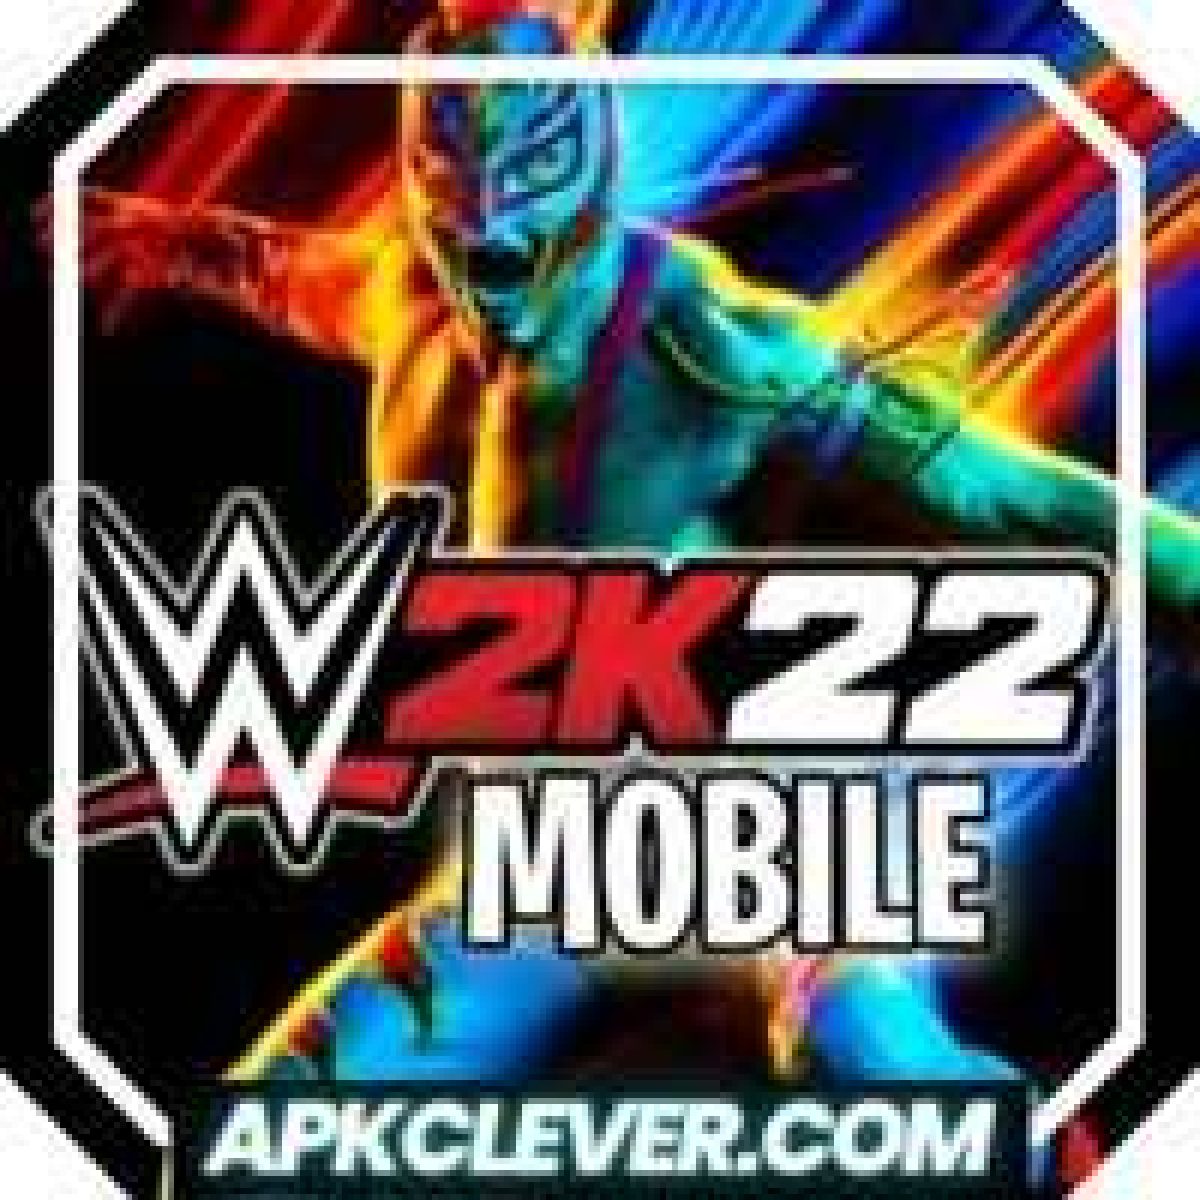 WWE 2K22 PPSSPP Zip File Download For Android - Stariphone